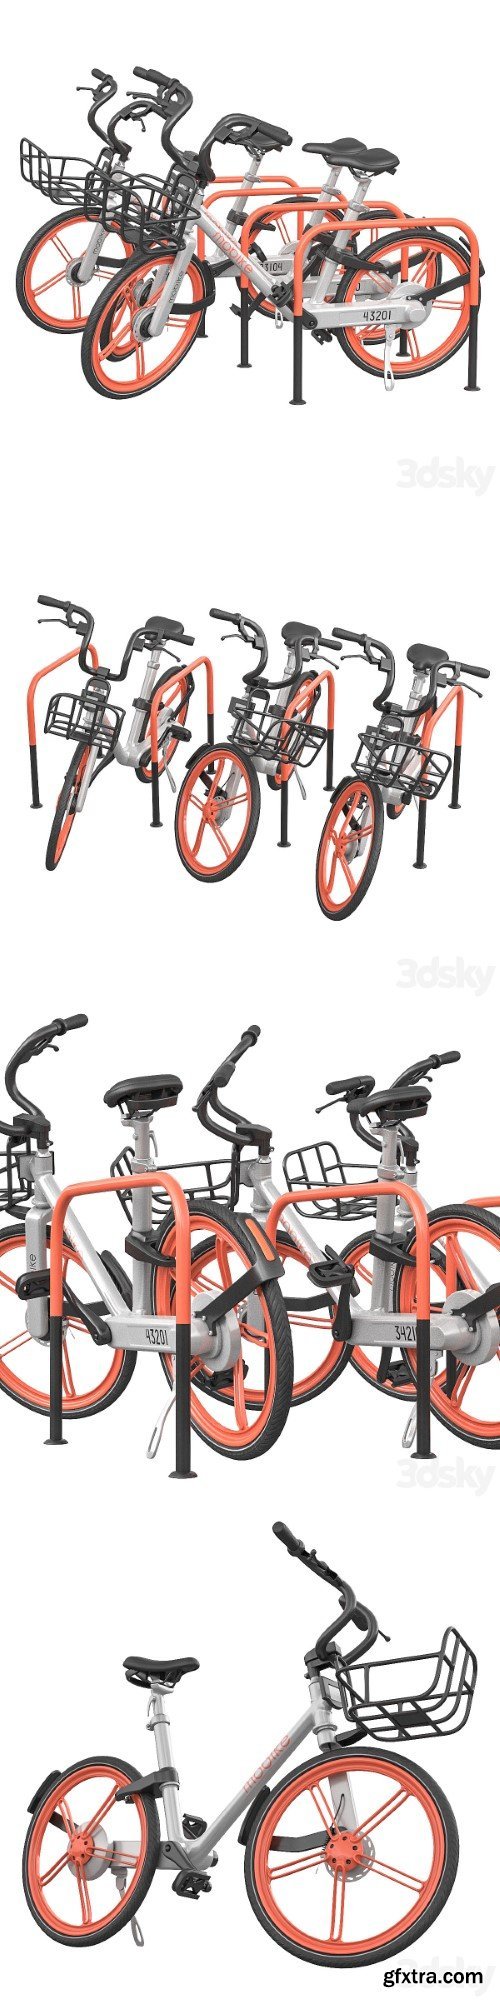 Bicycles in the parking area